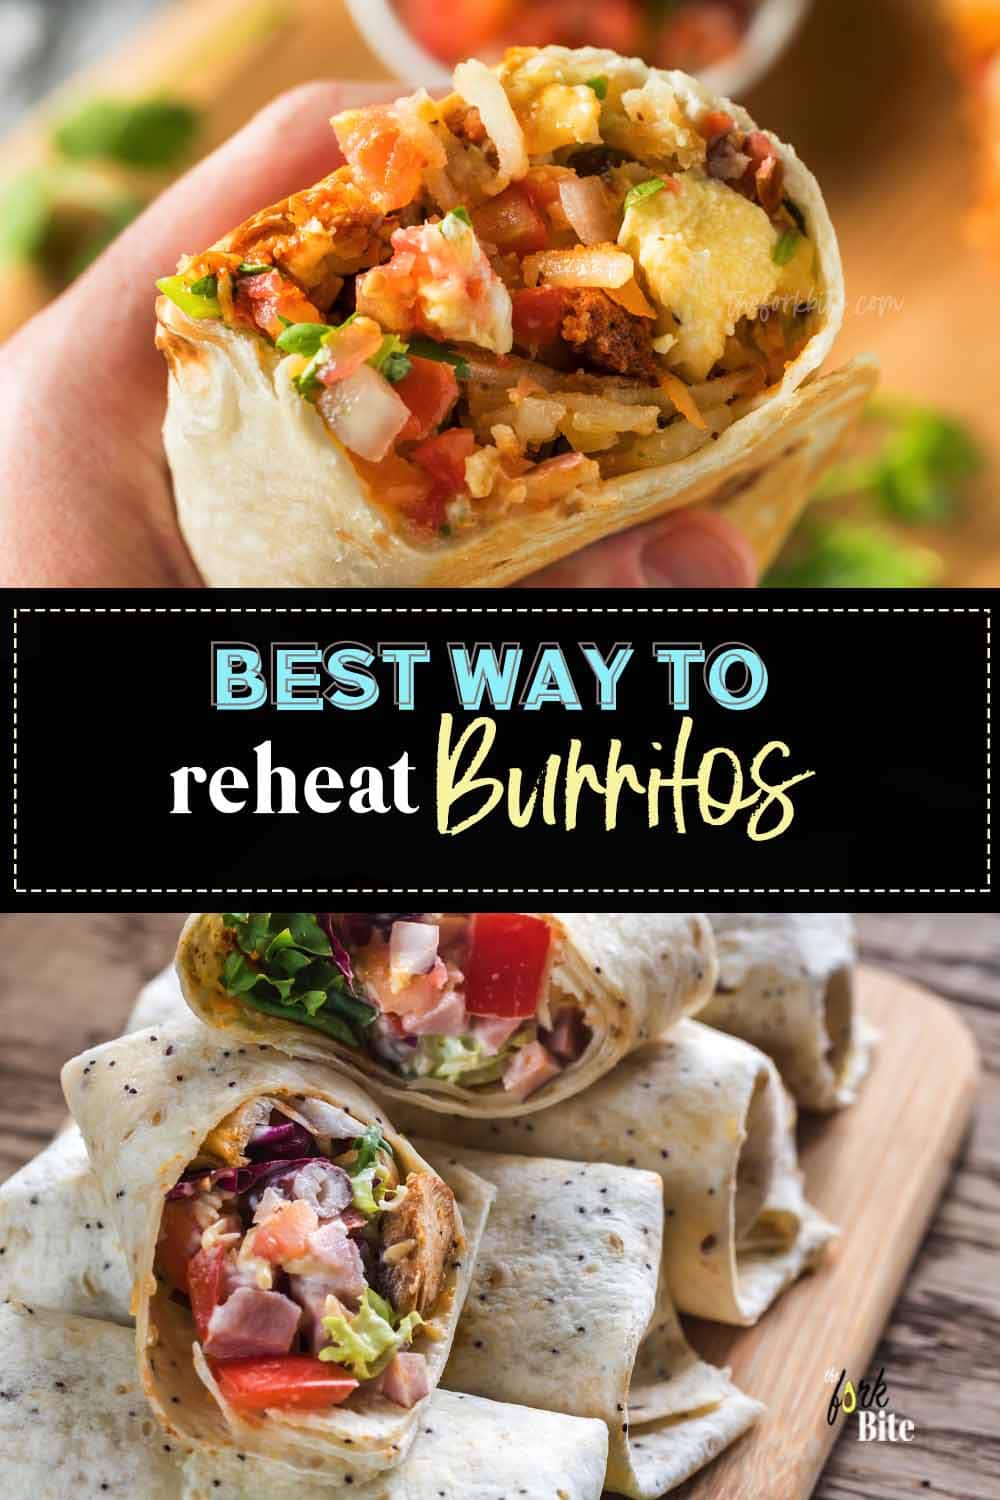 what is the best way to reheat a wrap?